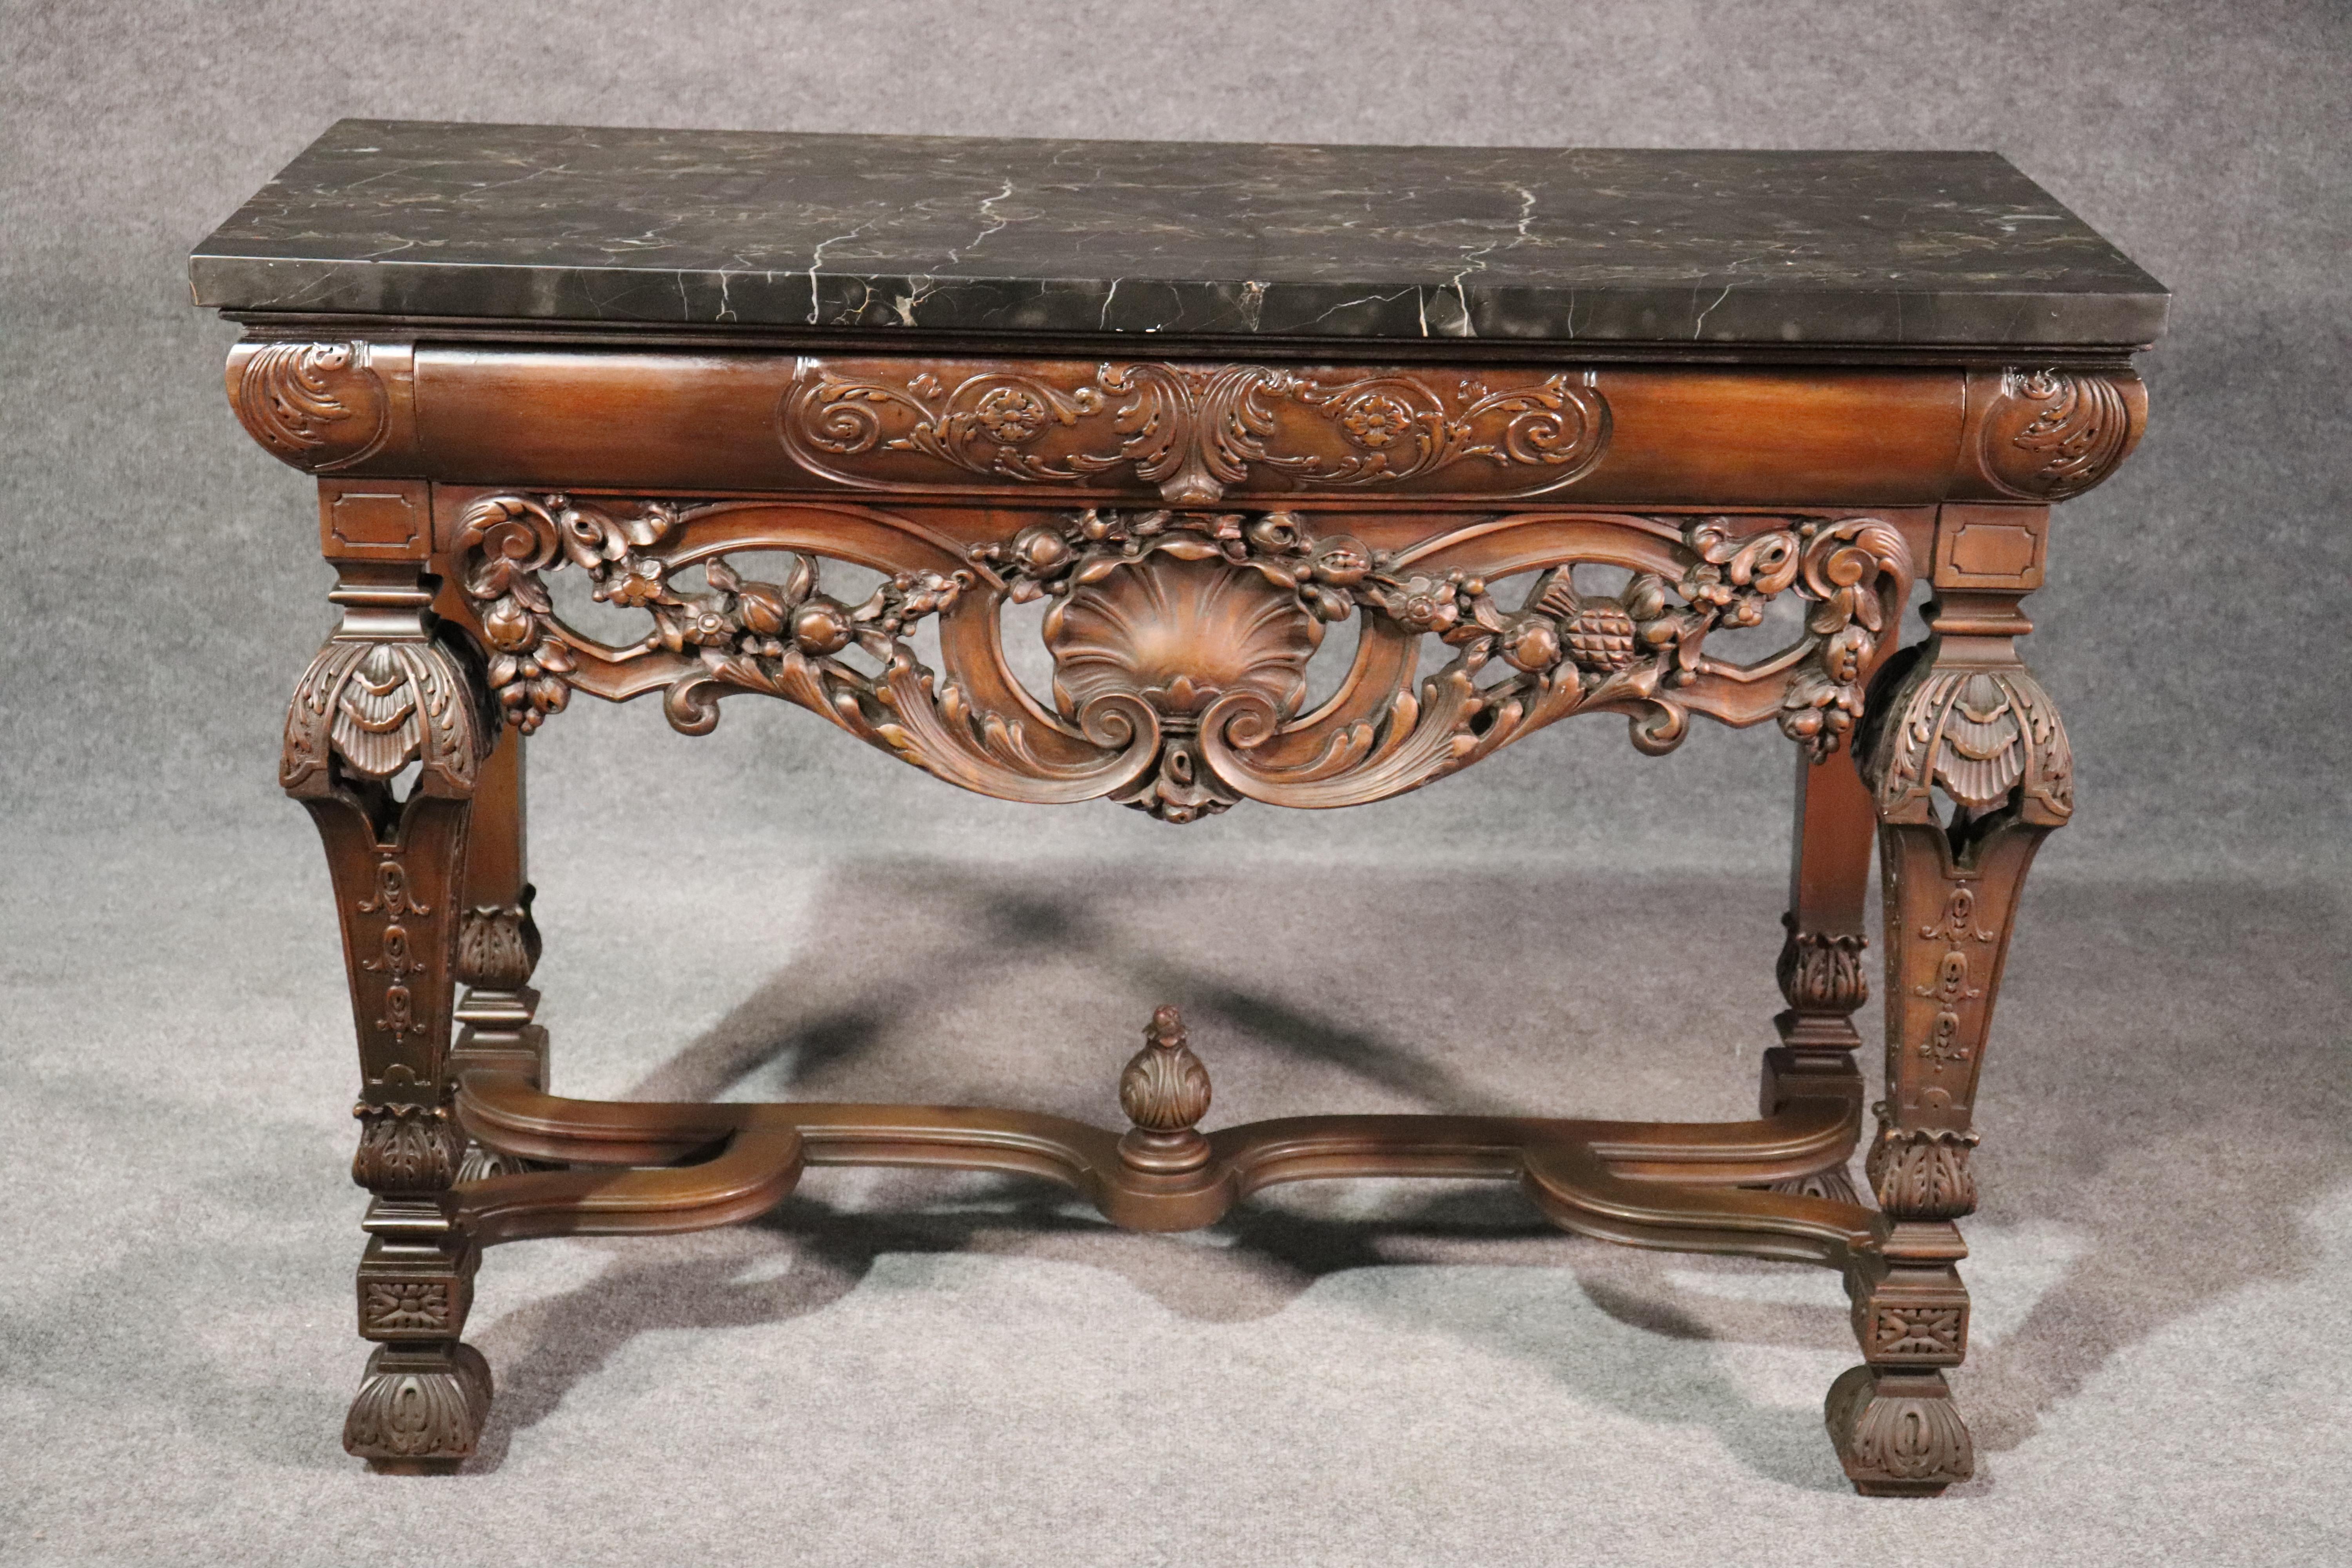 This is a great size console table or server, circa 1920. The table features a double-thick slab of heavy portoro marble with veins of creams, white and on a black field. The frame is solid walnut with oak secondaries for strength. The table is in